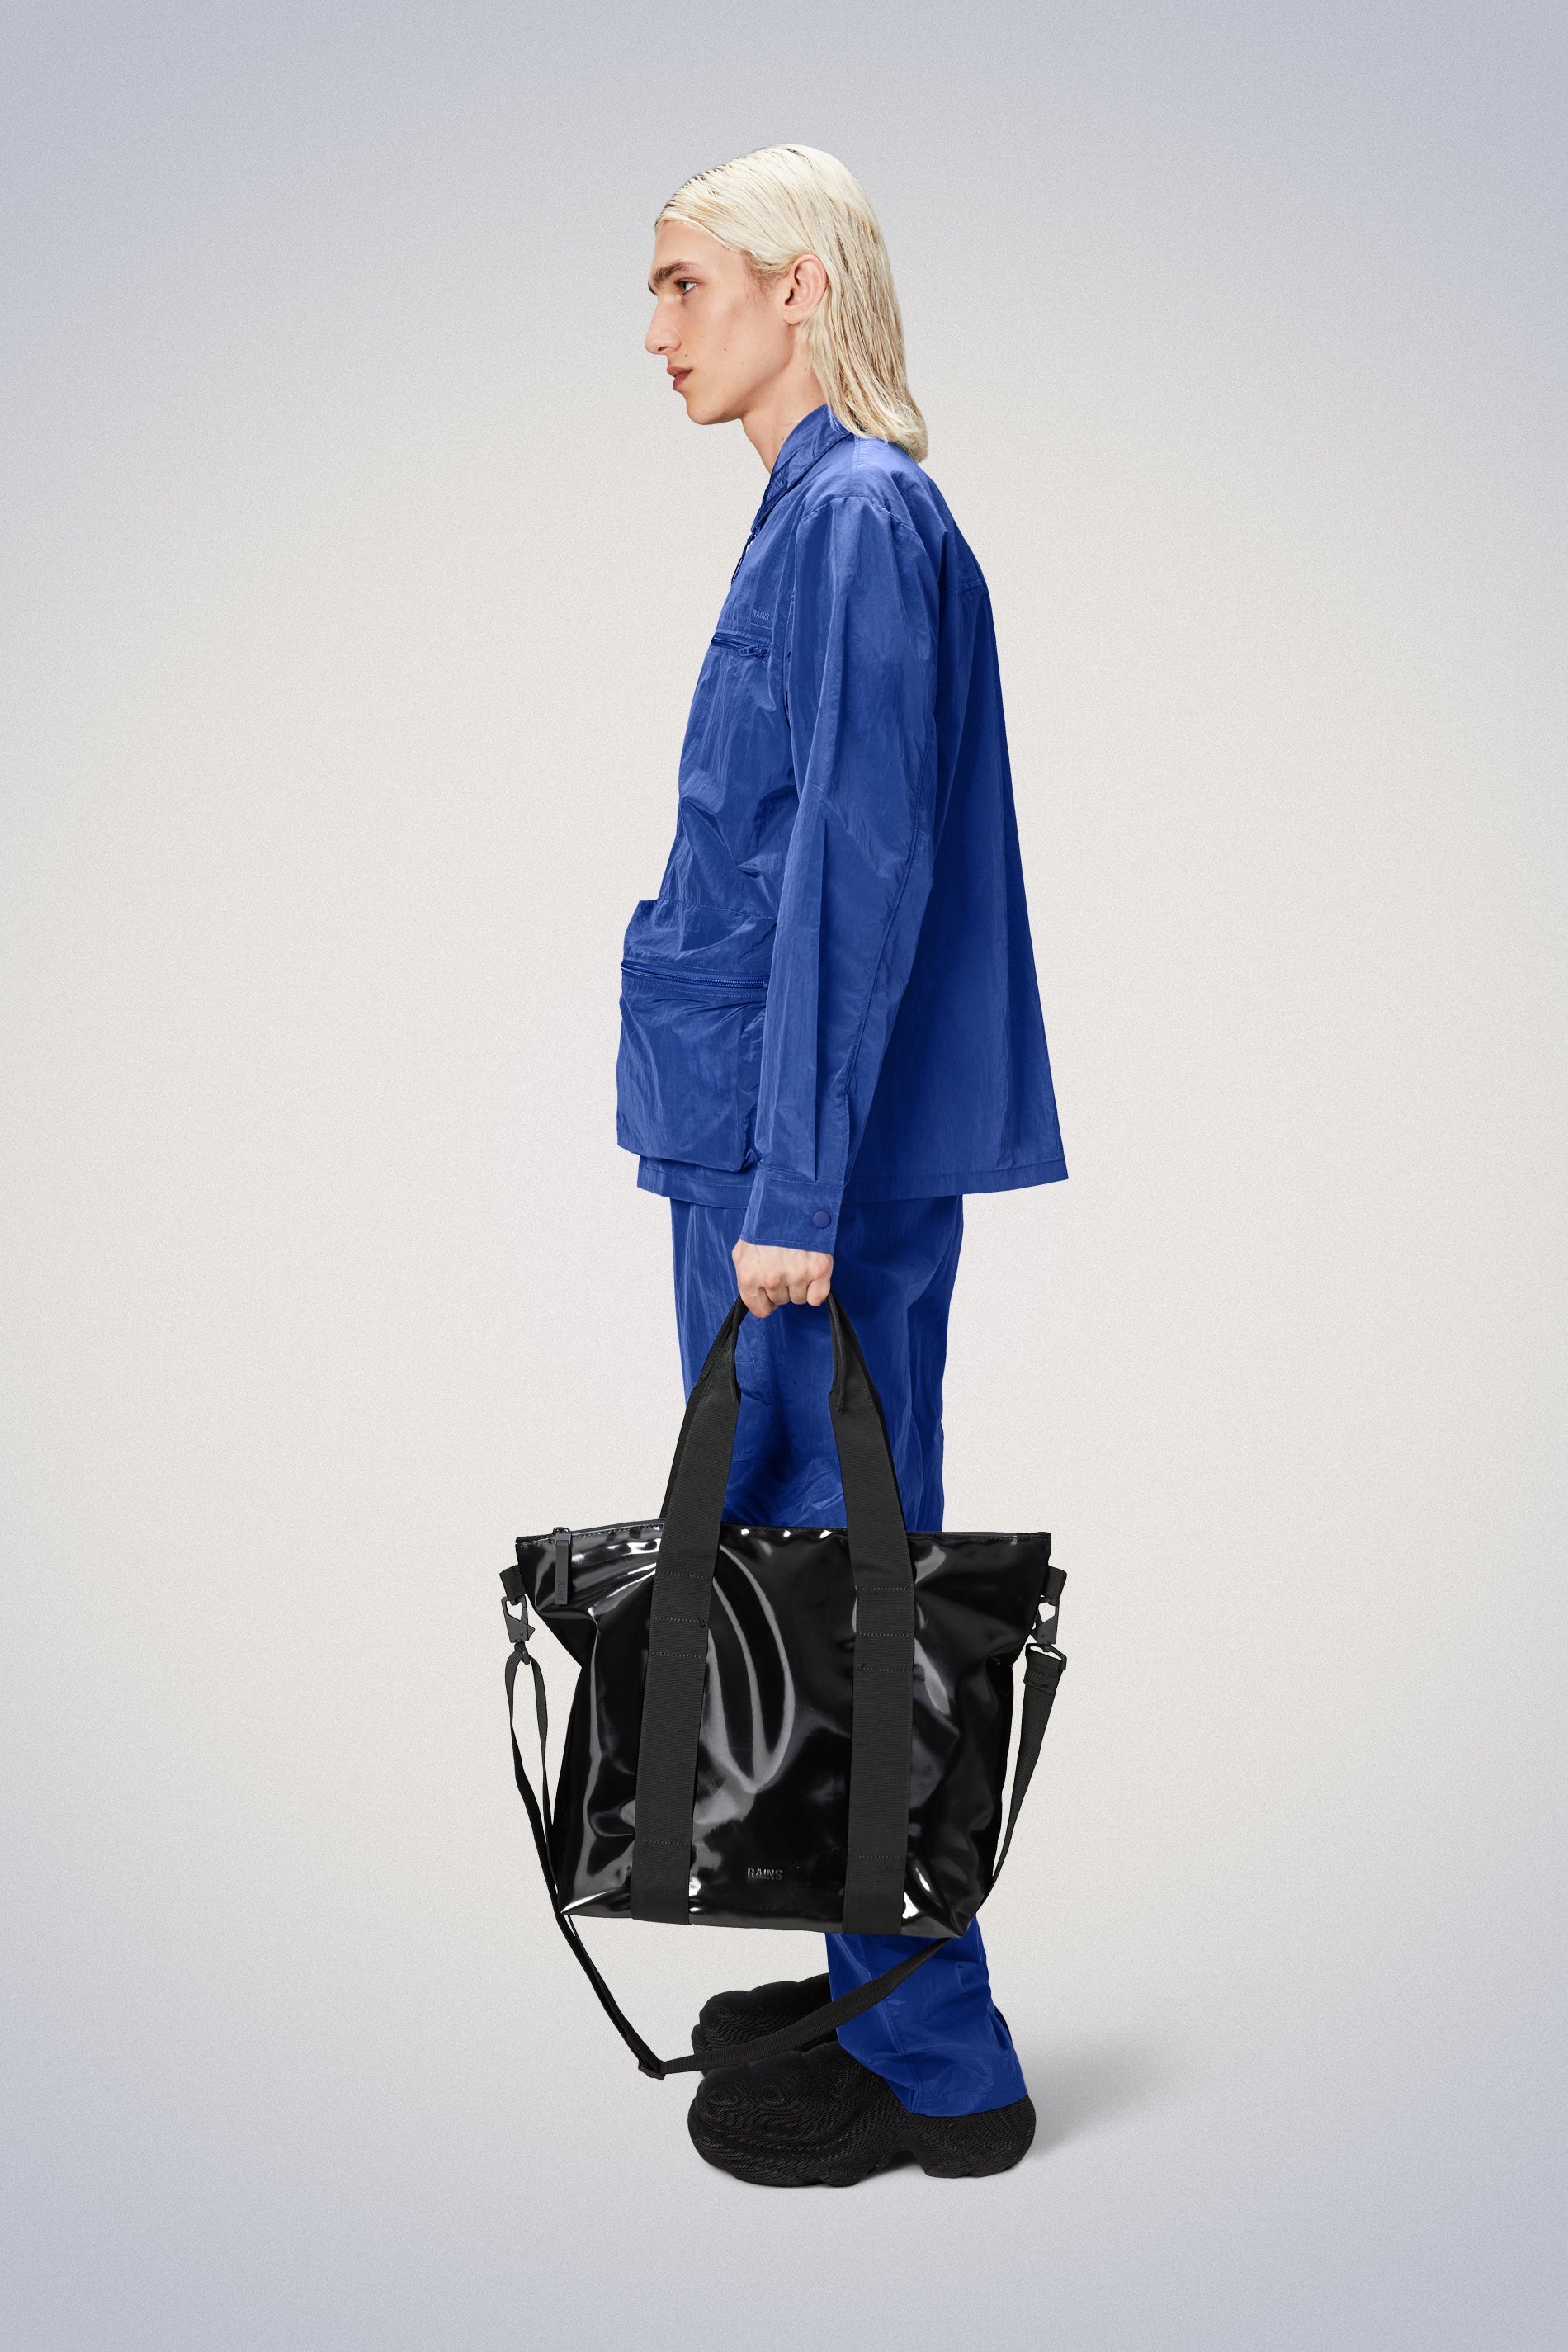 A woman in blue pajamas holding a Rains Tote Bag Mini - Night made from durable materials, featuring reinforced stitching for added durability. The mini size provides plenty of storage space while being easy to carry.